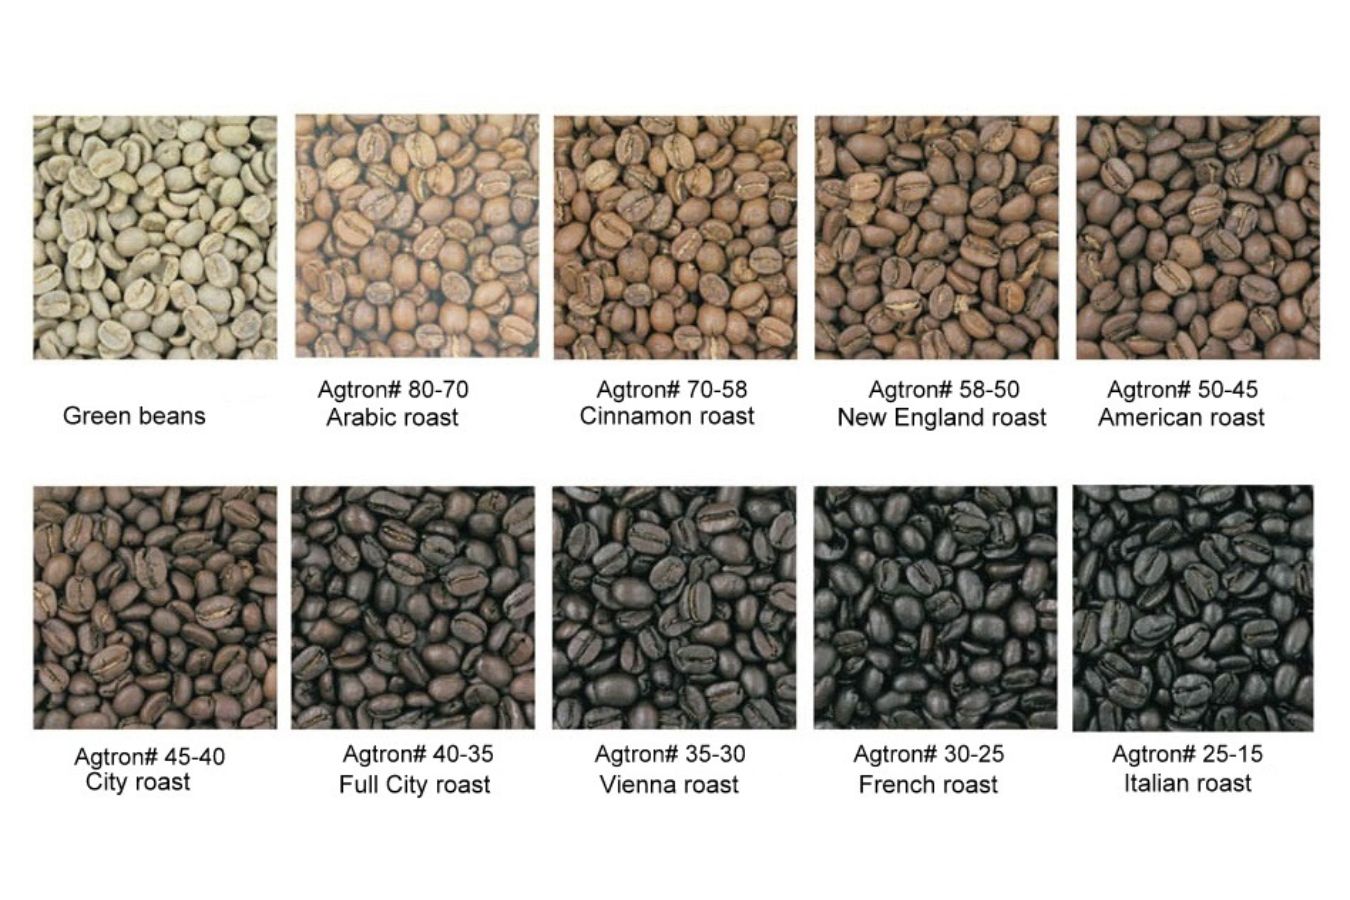 Physical Changes During Roasting (2)